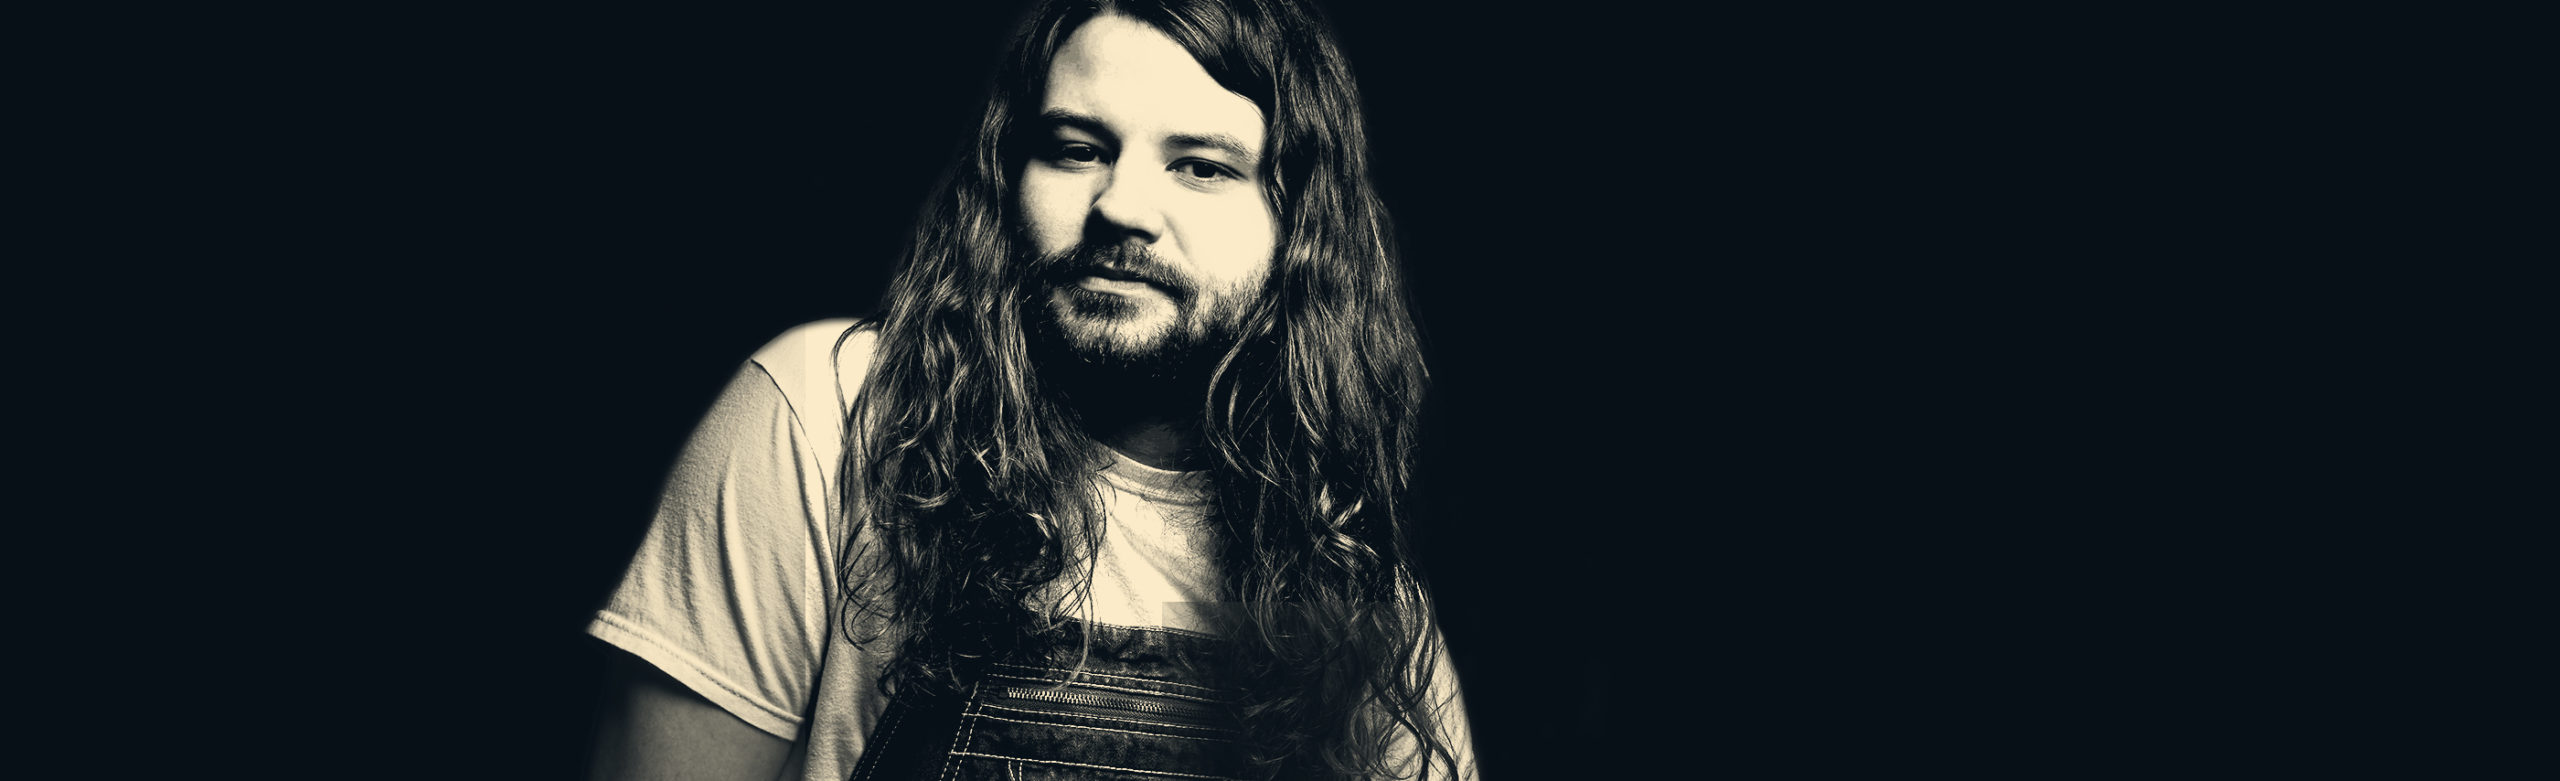 Grammy Nominated Country Musician Brent Cobb & Them Will Headline Missoula Concert Image